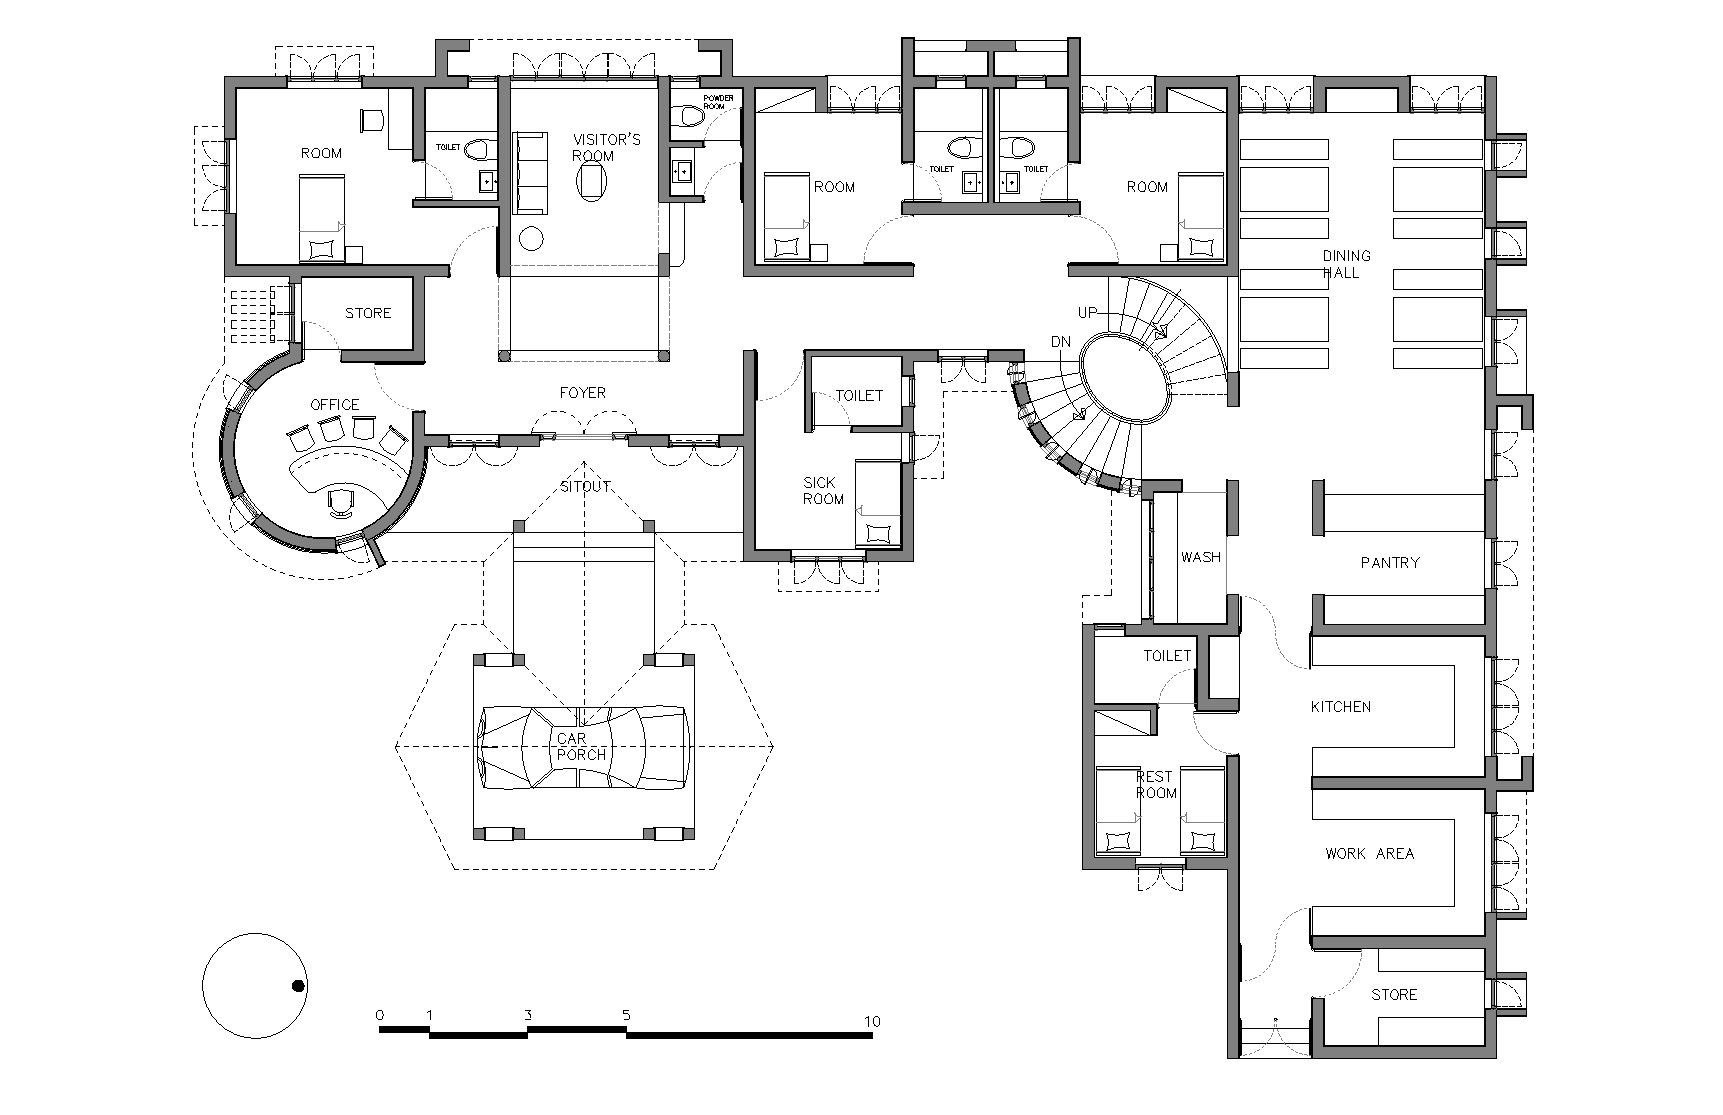 Ground Floor Plan of Gril's Home